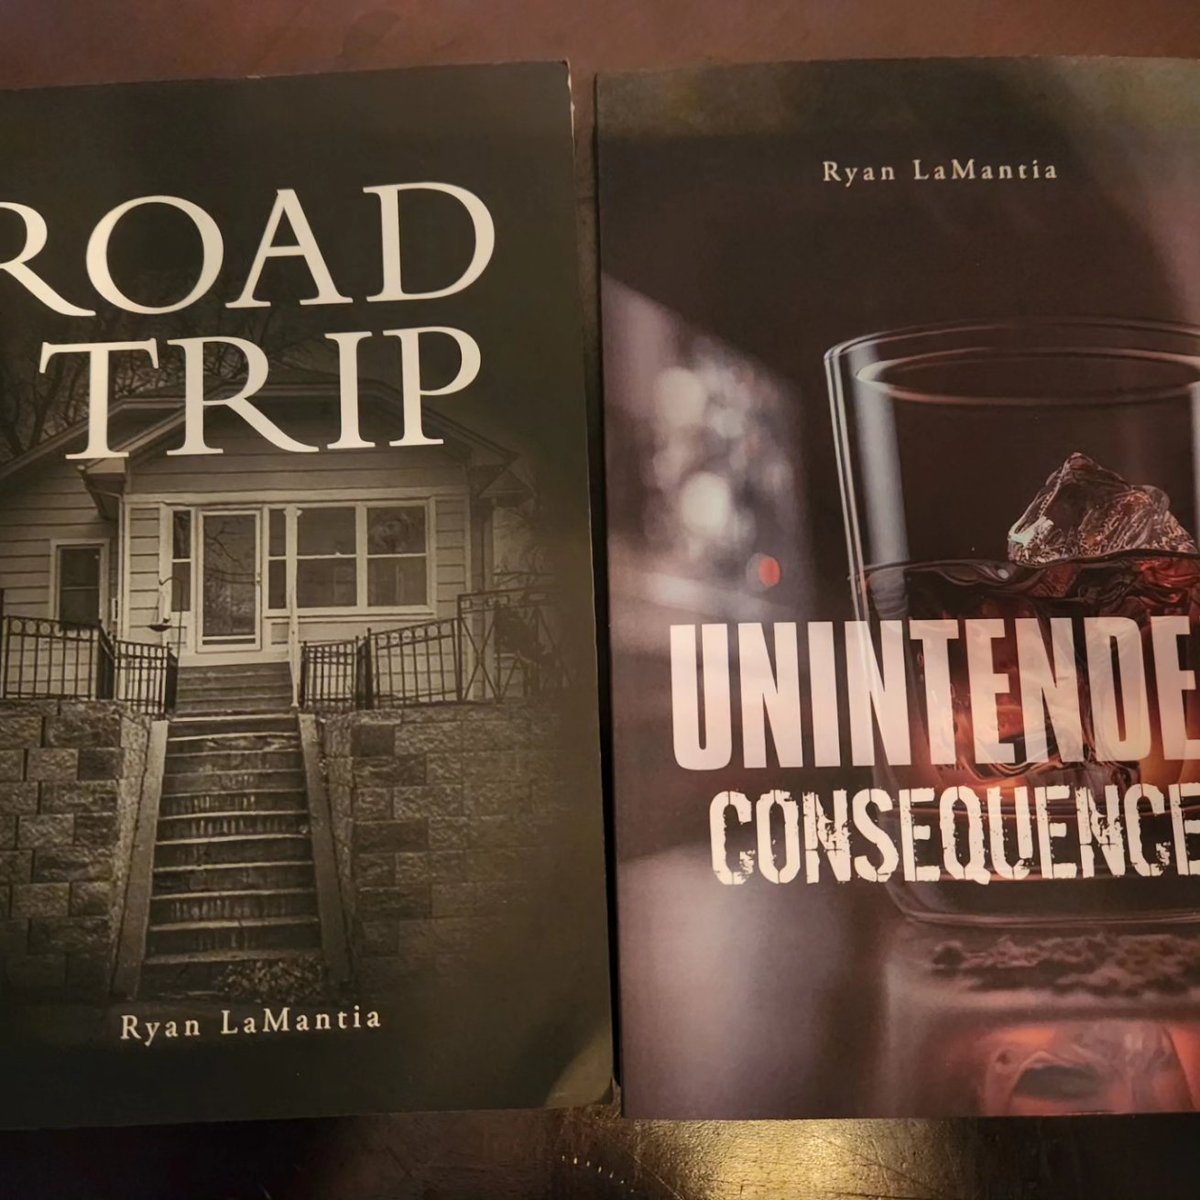 I'll be shipping books midweek.  If you'd like your own signed copy of Road Trip or Unintended Consequences, message me here.
-Road Trip: $20
-Unintended Consequences: $22
-Shipping: $5 (in lower 48)

#giftideas #smallbusinesssaturday #read #giftgiving  #happyholidays #giveabook